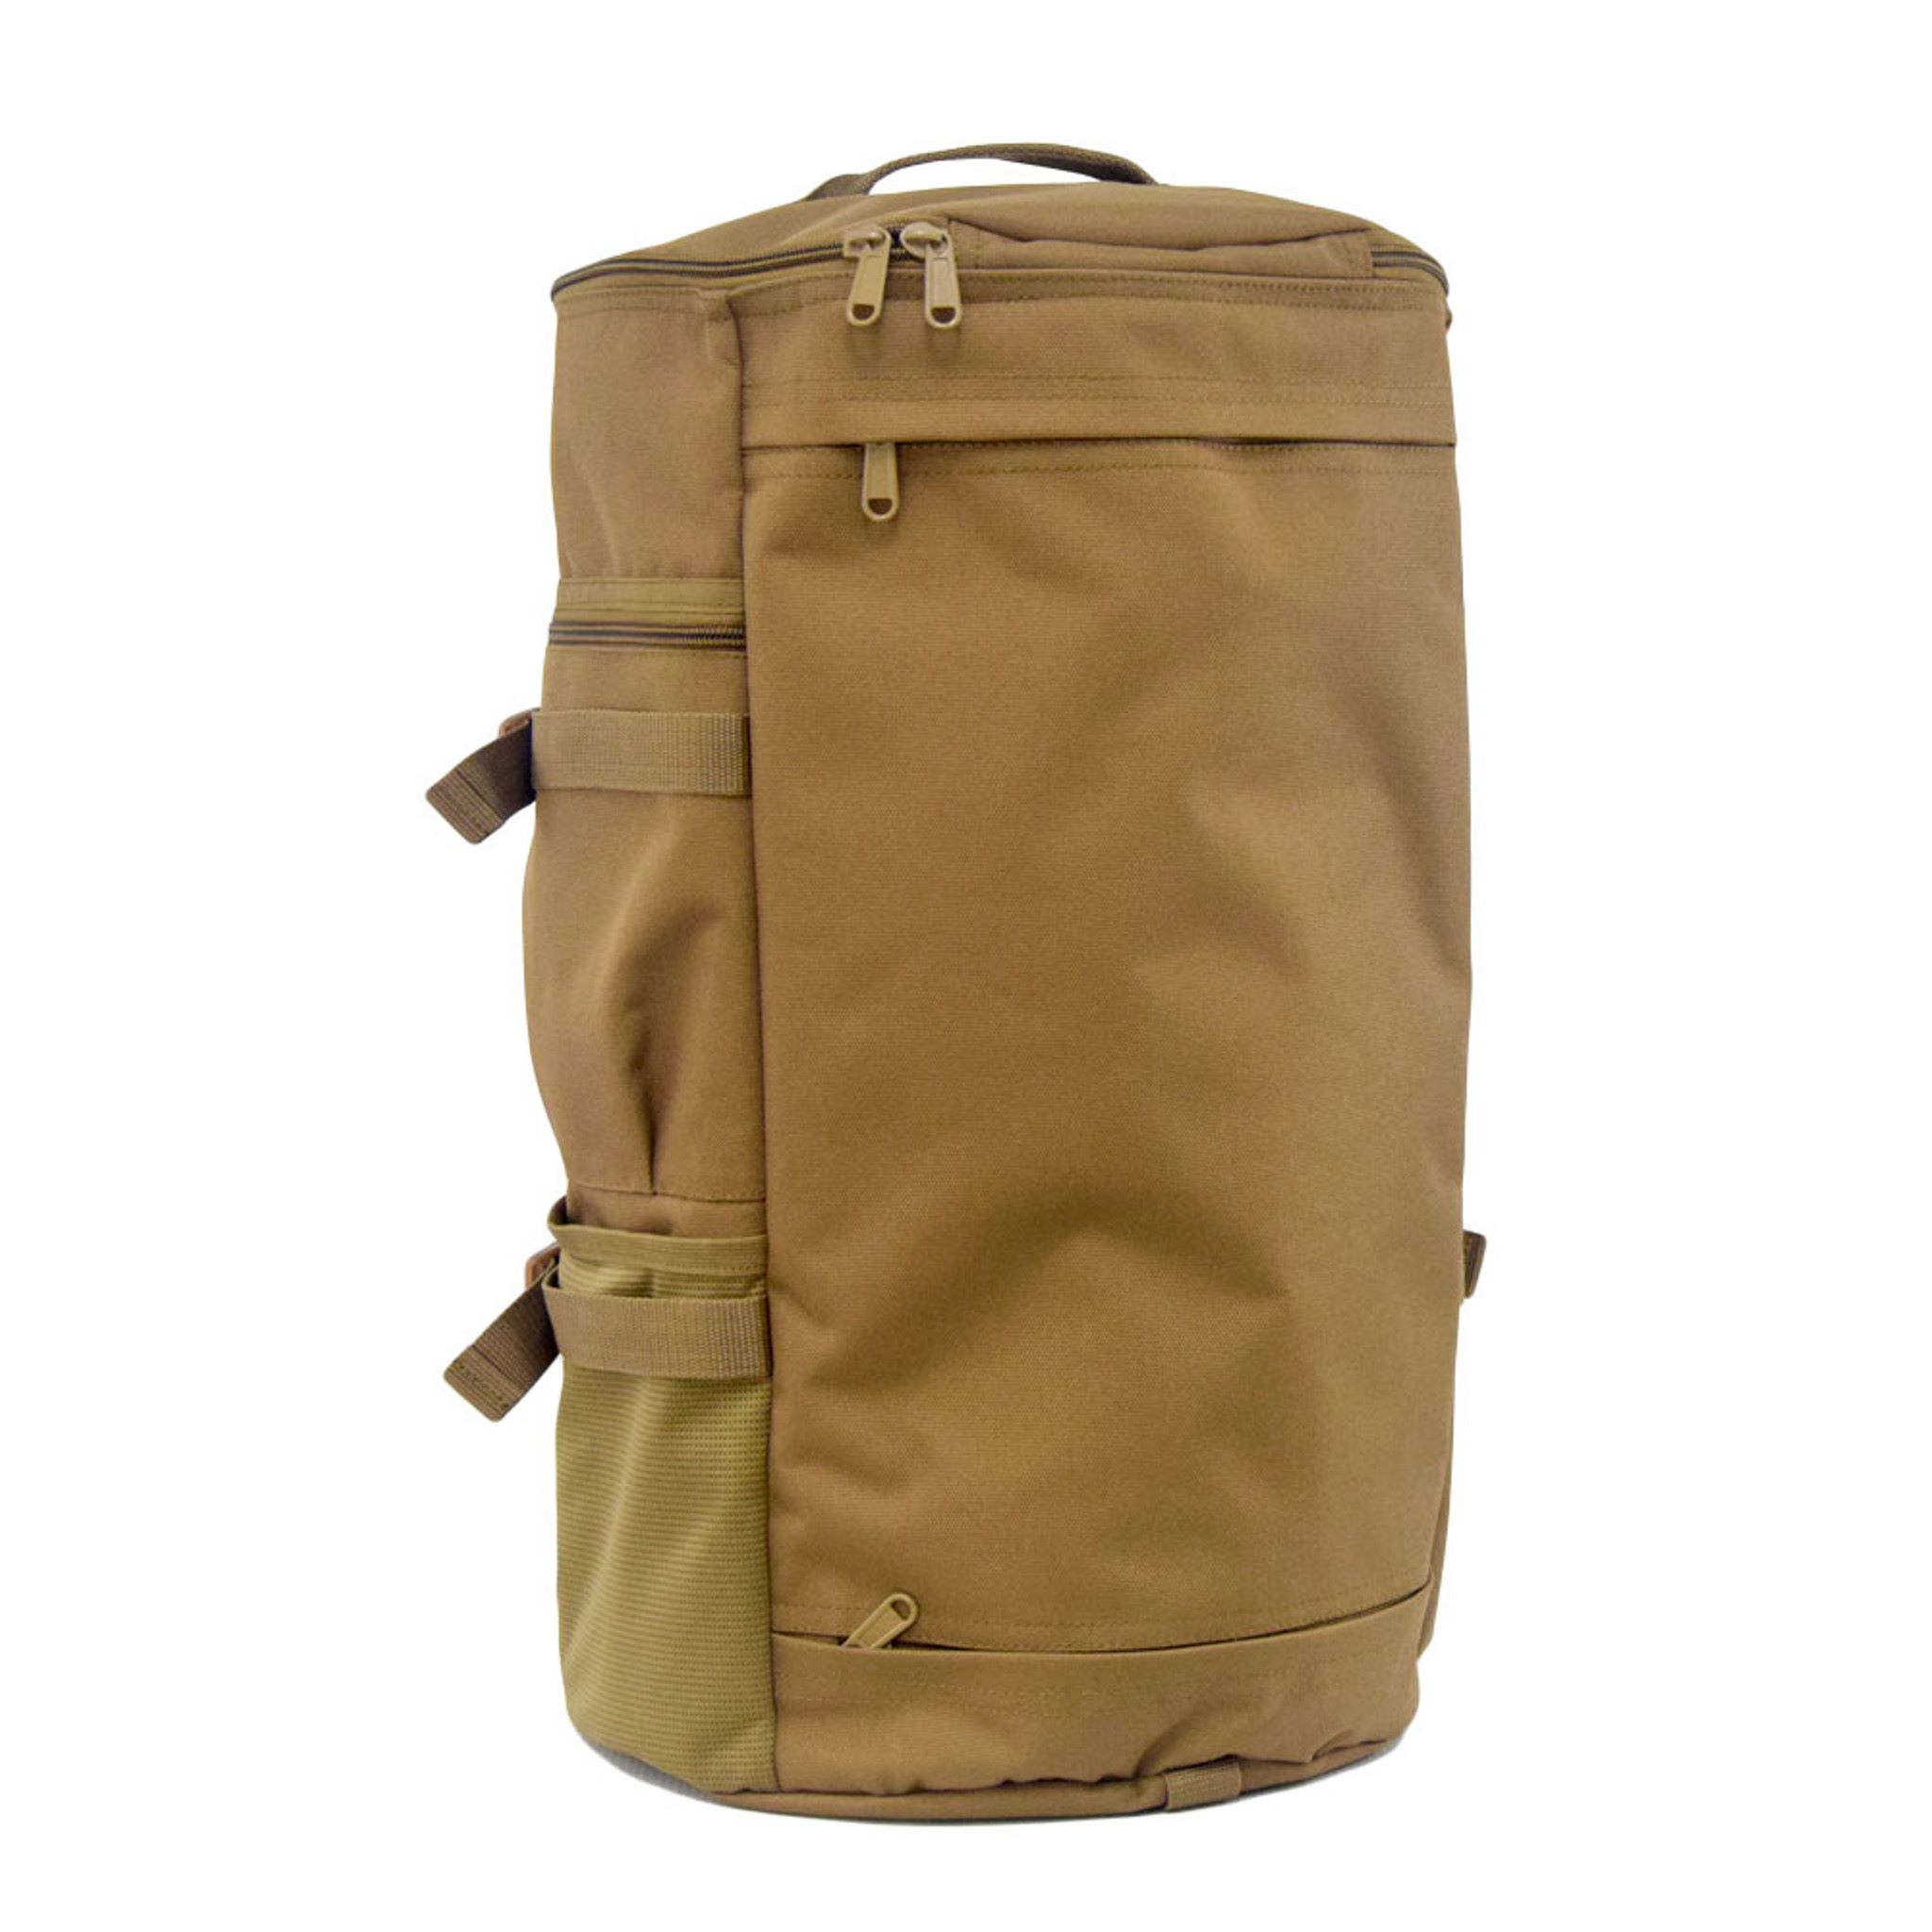 Zippered Canvas Deluxe Duffel Bag O.D. - Stansport